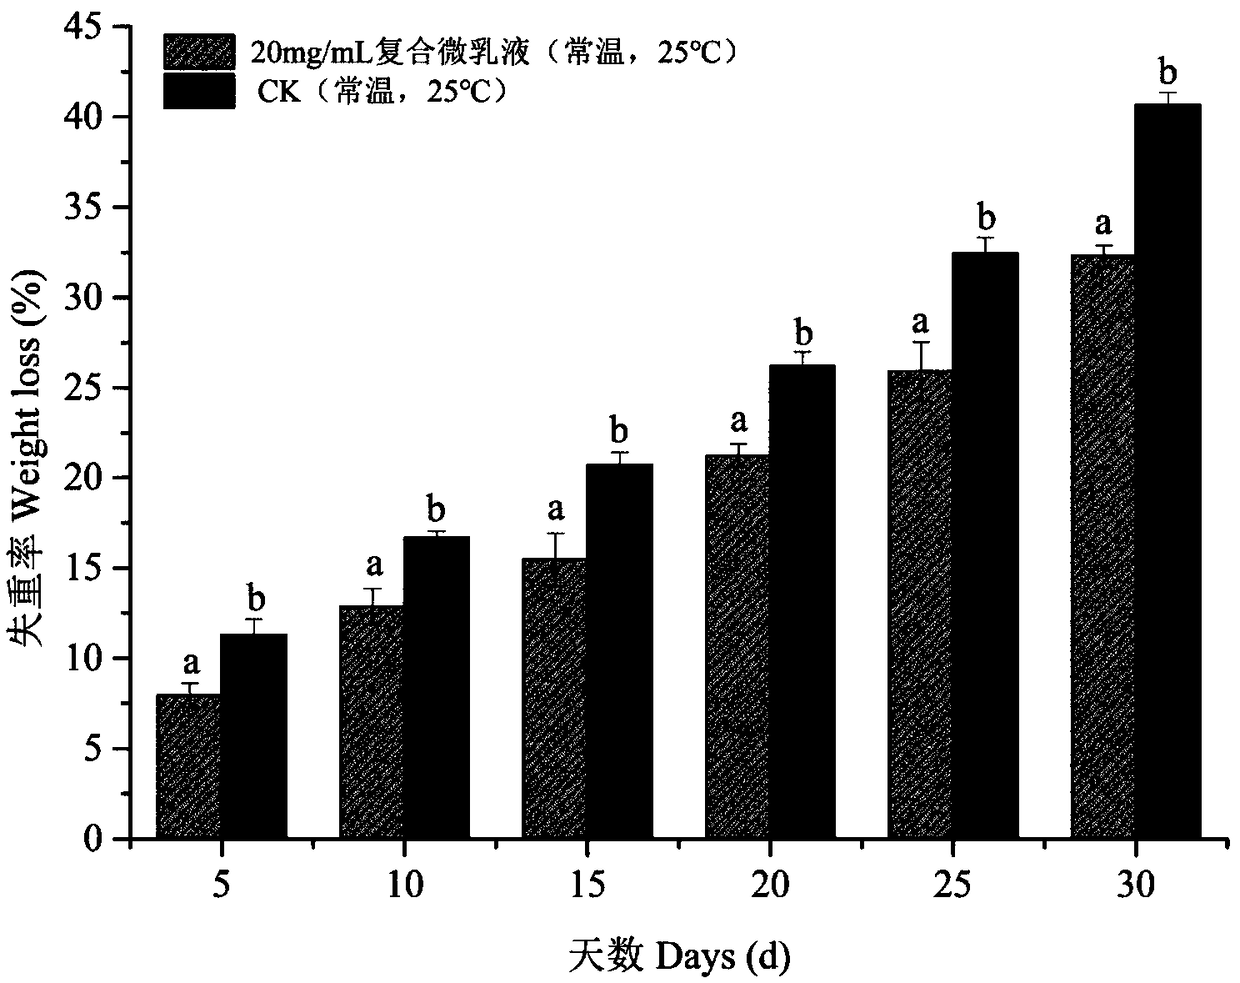 Fresh keeping agent composition for mandarins and preparation method of fresh keeping agent composition